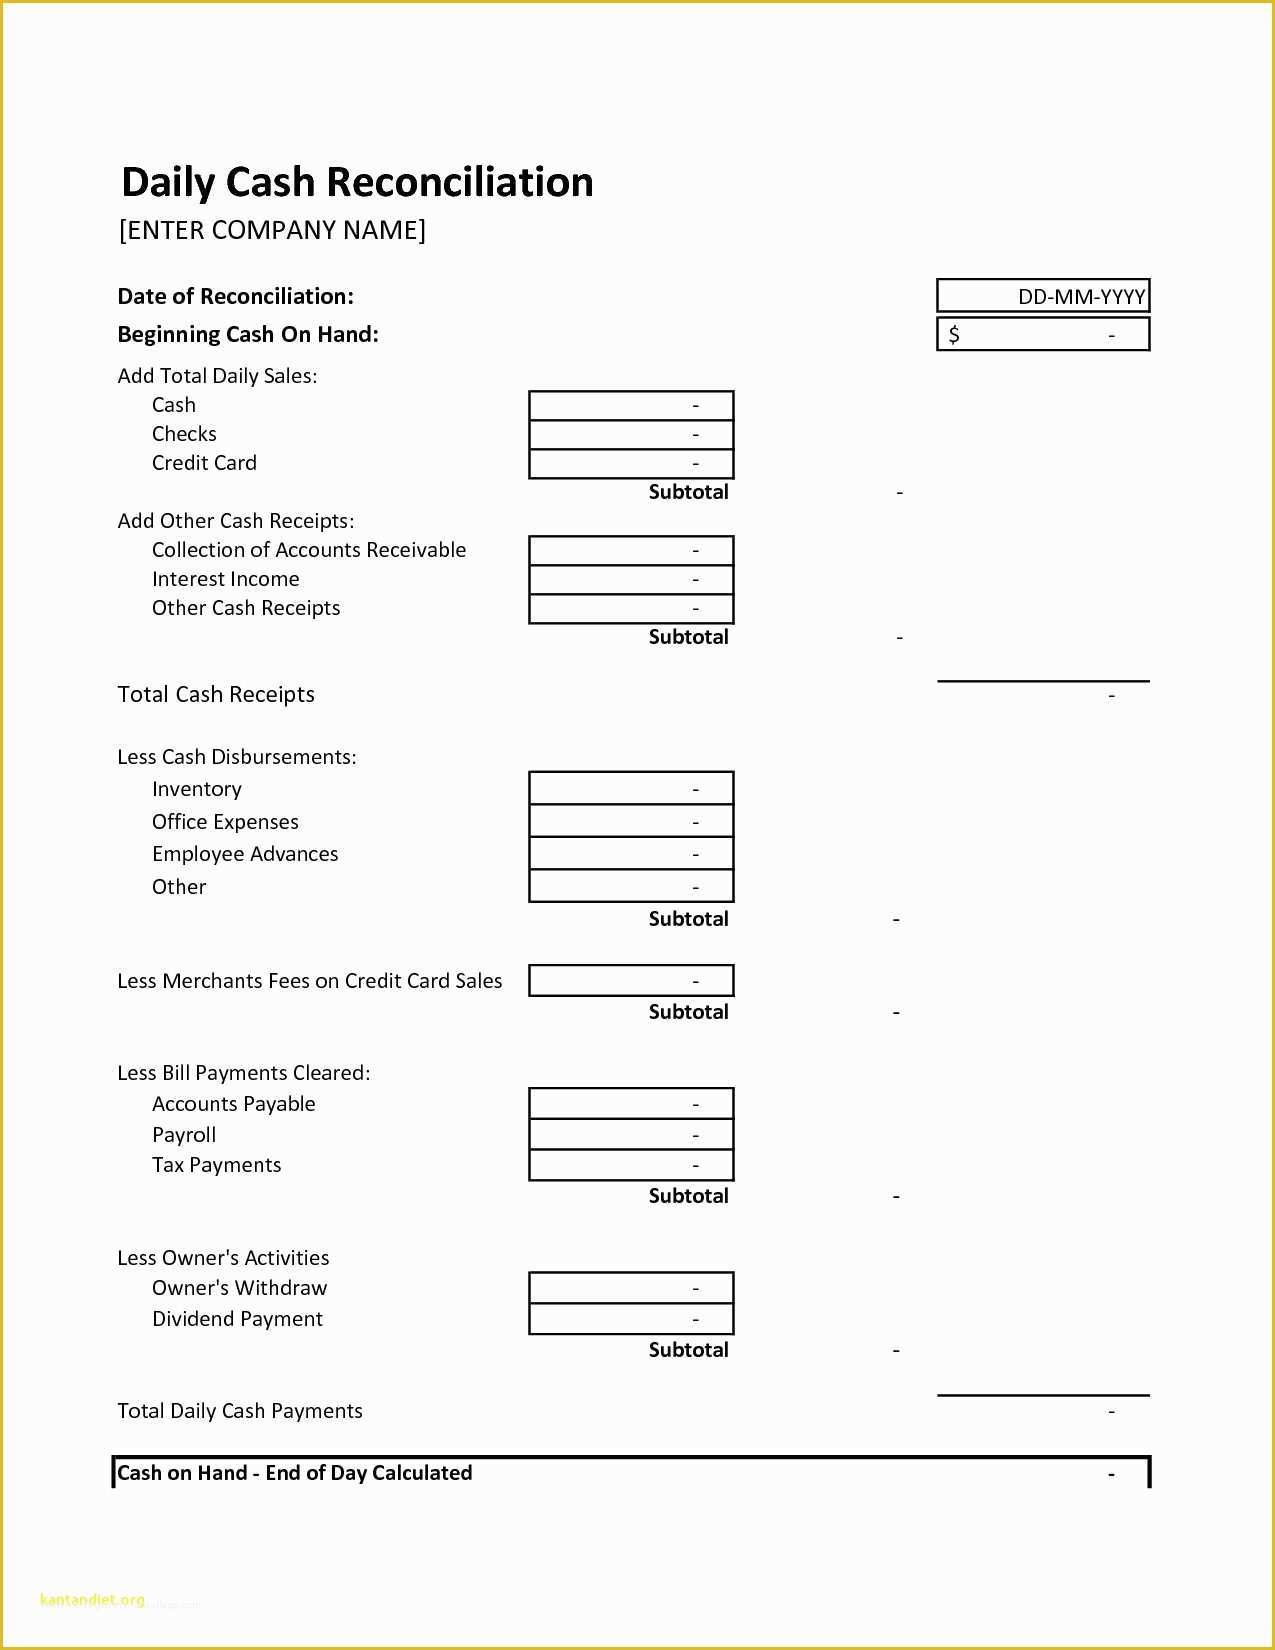 Cash Sheet Template Free Of Daily Cash Sheet Template Excel